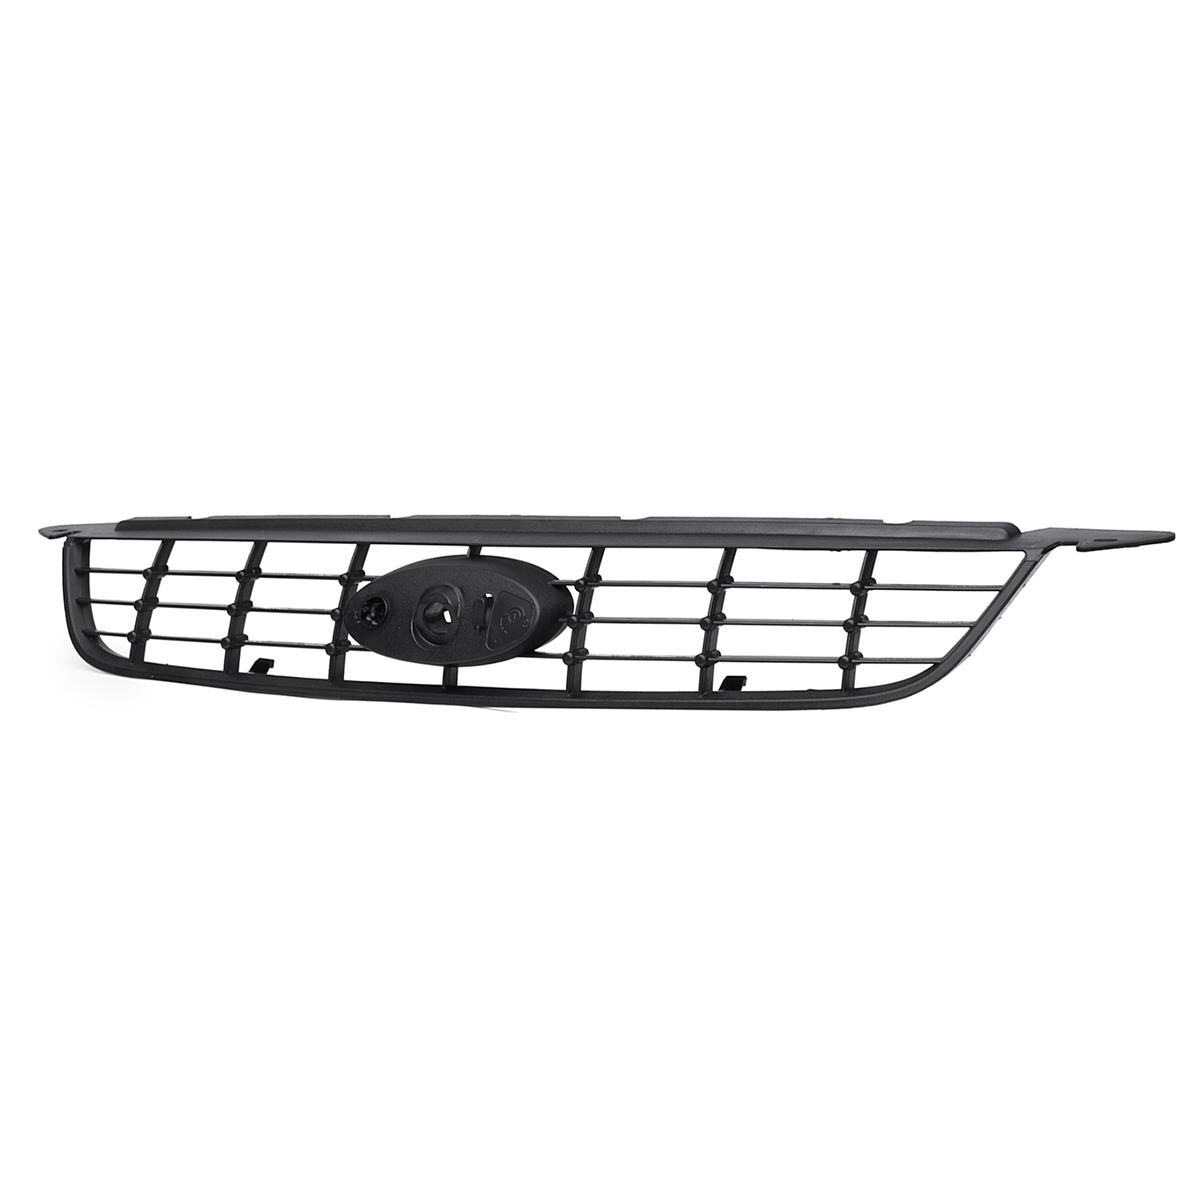 Black-Front-Bumper-Radiator-Grille-Centre-Vent-Air-Intake-Grill-For-Focus-MK2-2007-2011-1394576